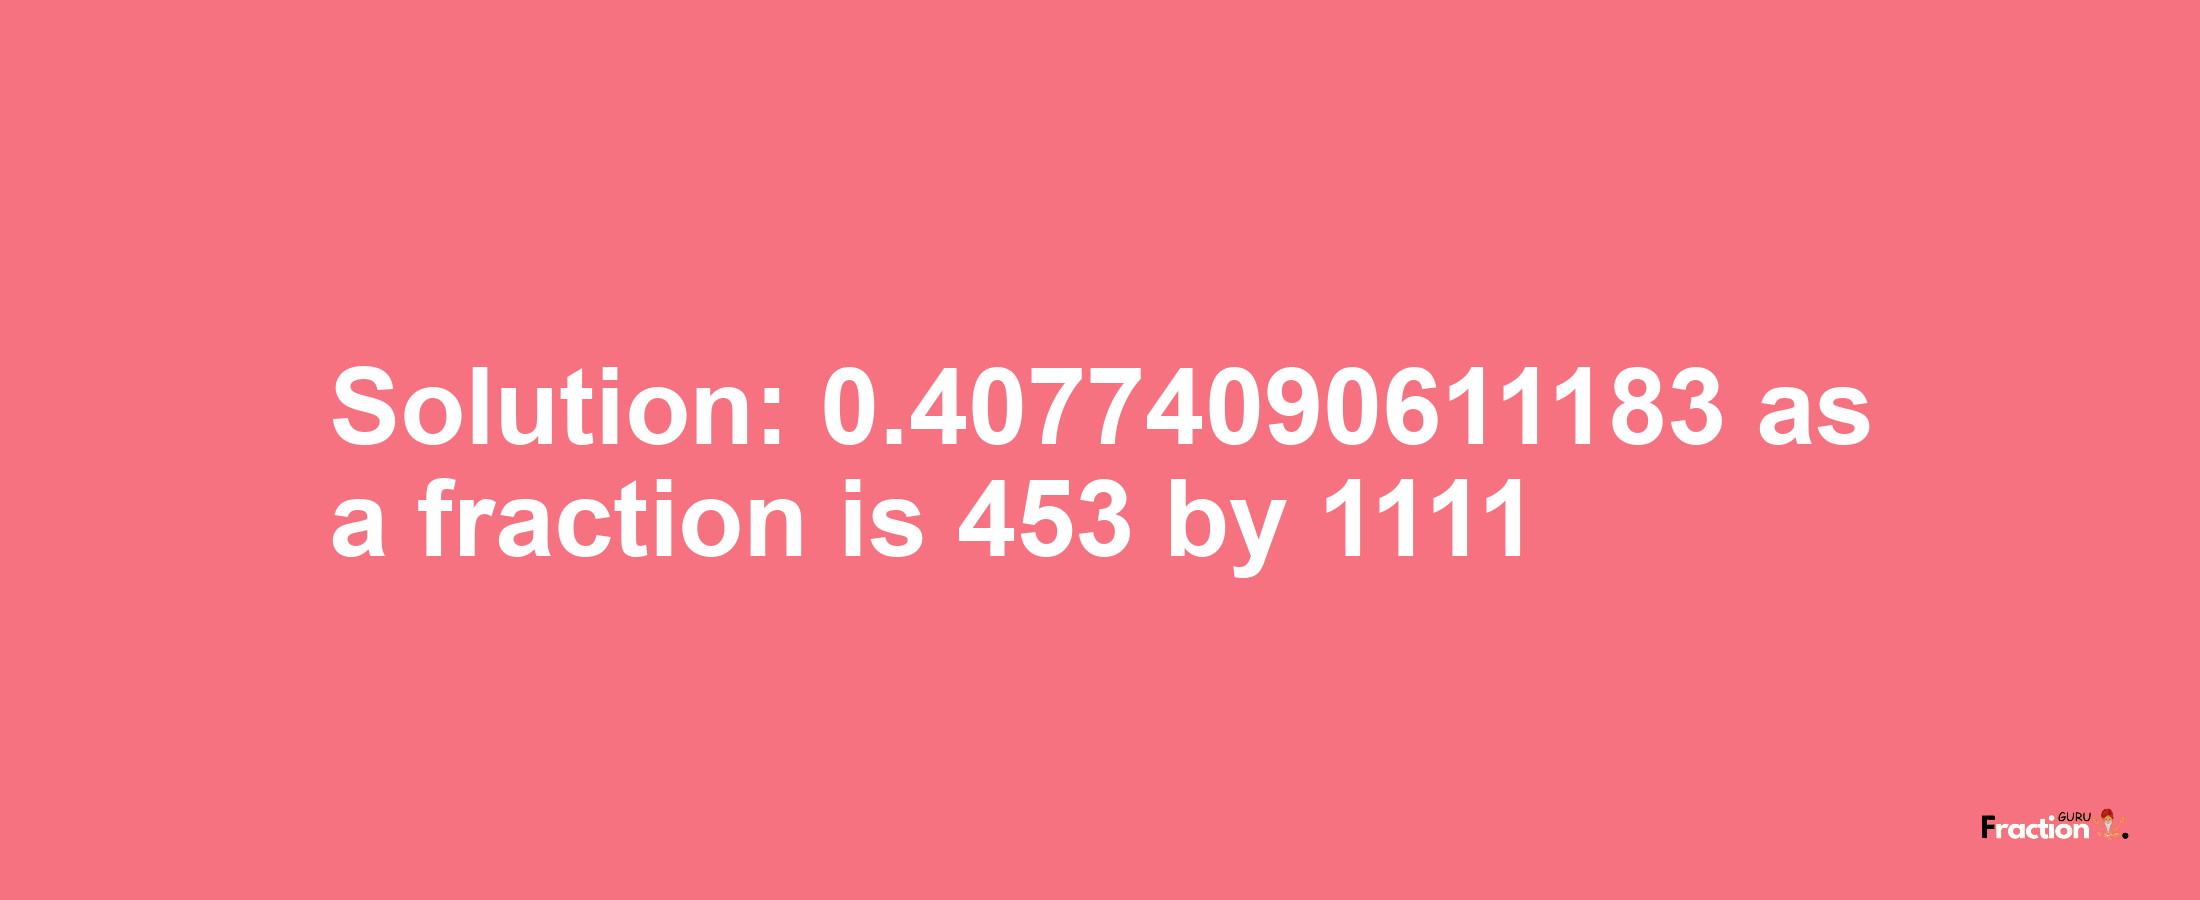 Solution:0.40774090611183 as a fraction is 453/1111